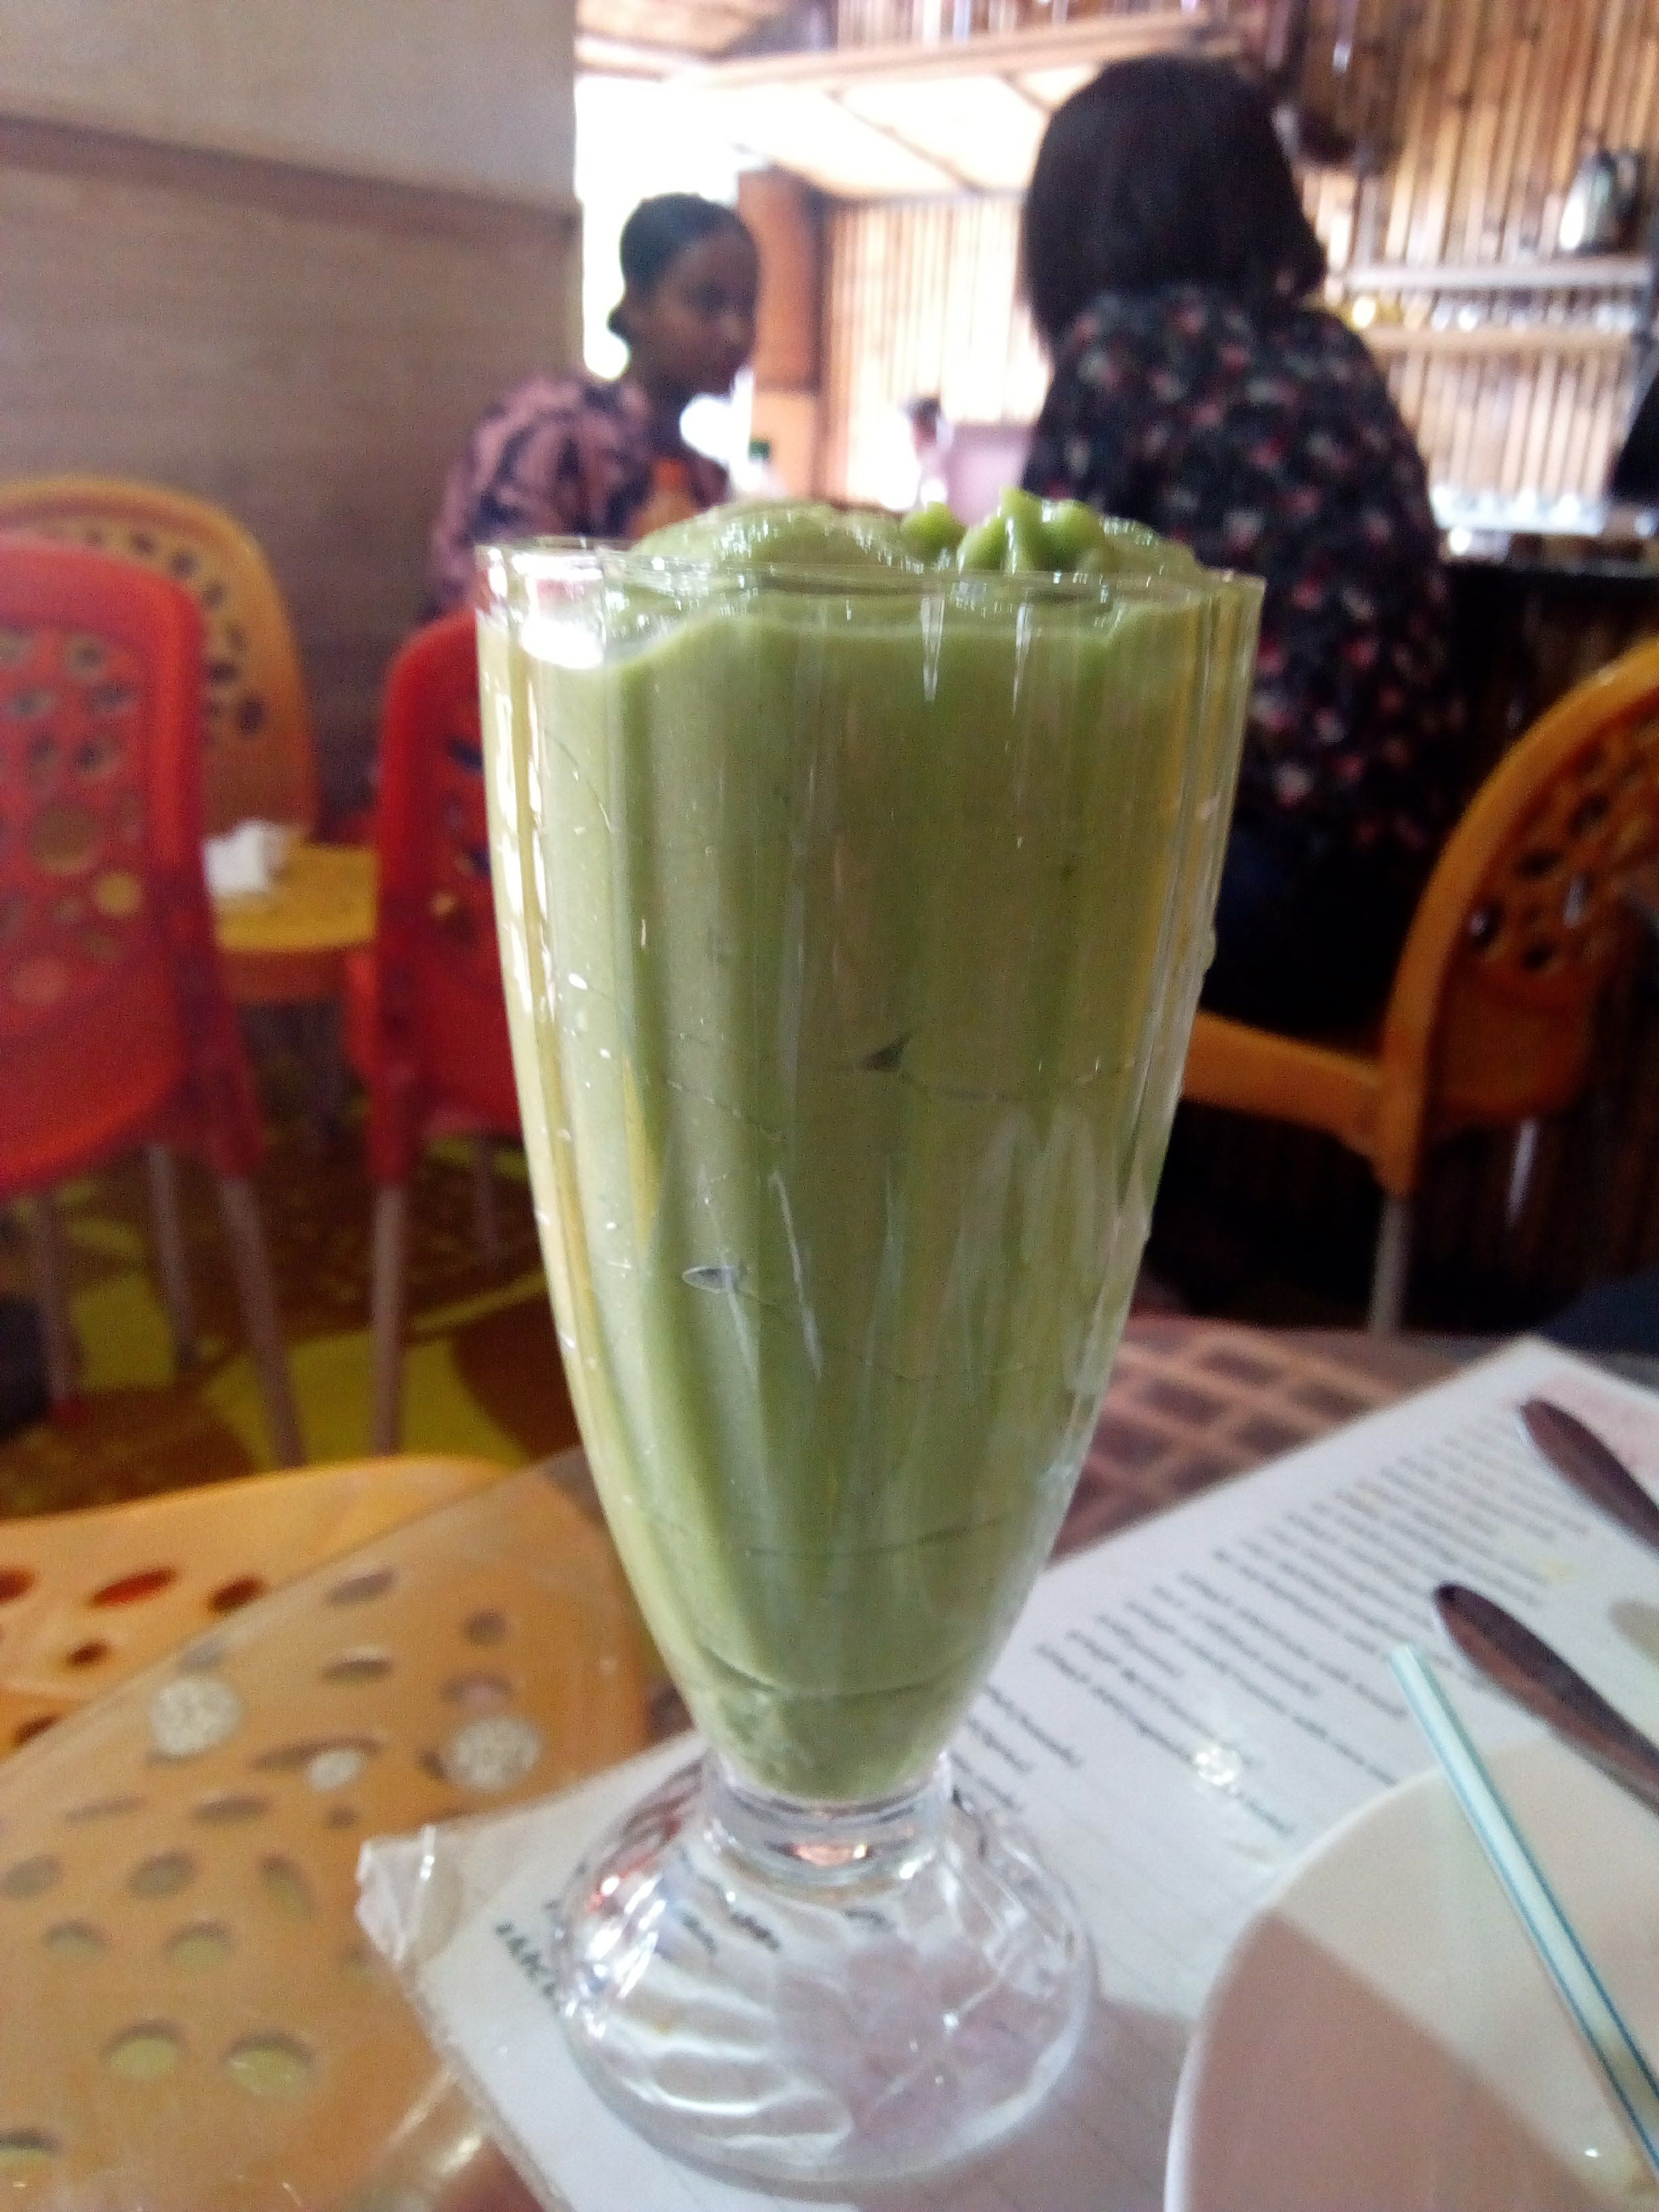 Avocado smoothie; there are fruit shops everywhere